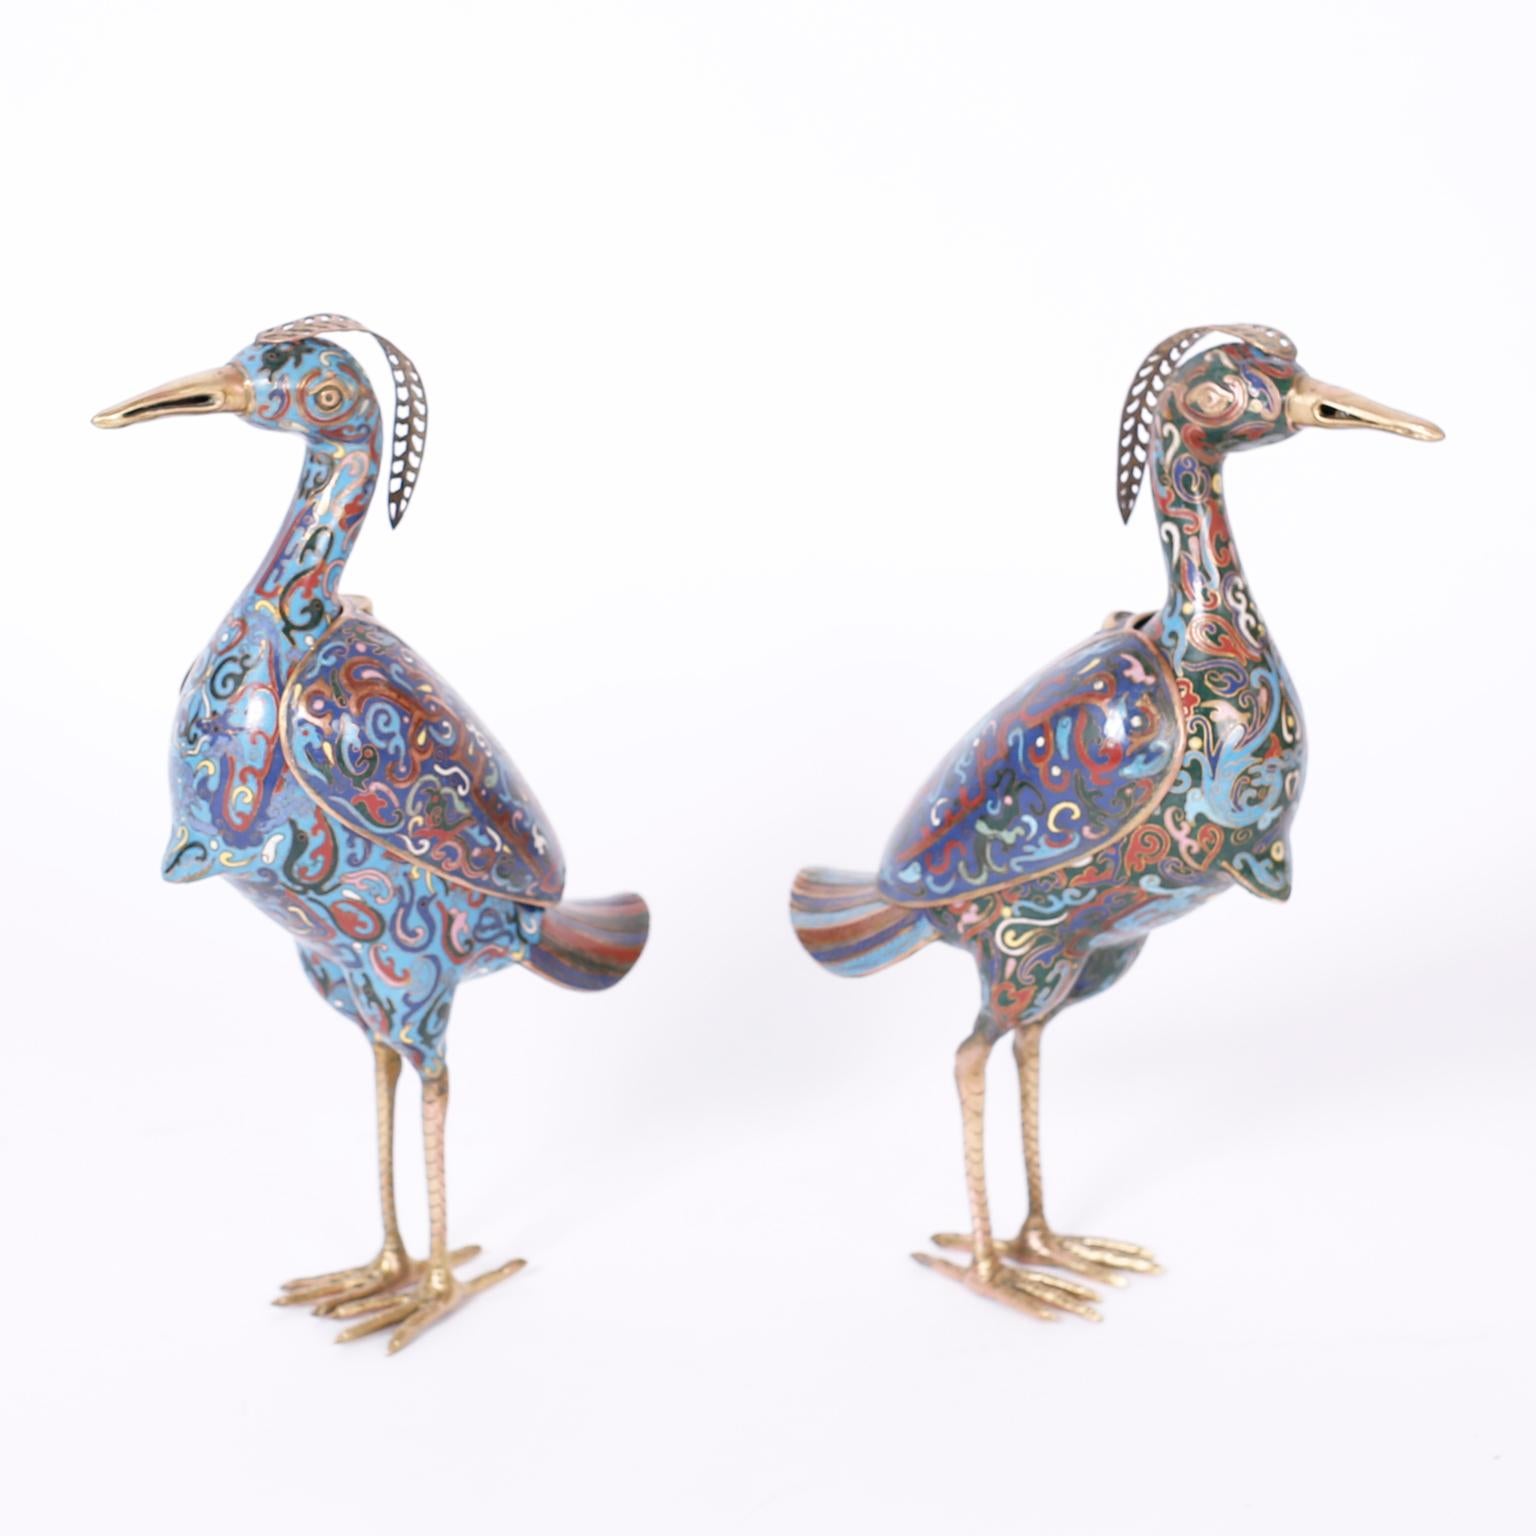 Pair of life size Chinese cloisonné or enamel on copper birds decorated with elaborate floral designs, having brass crests, beaks, and feet and removable wings.